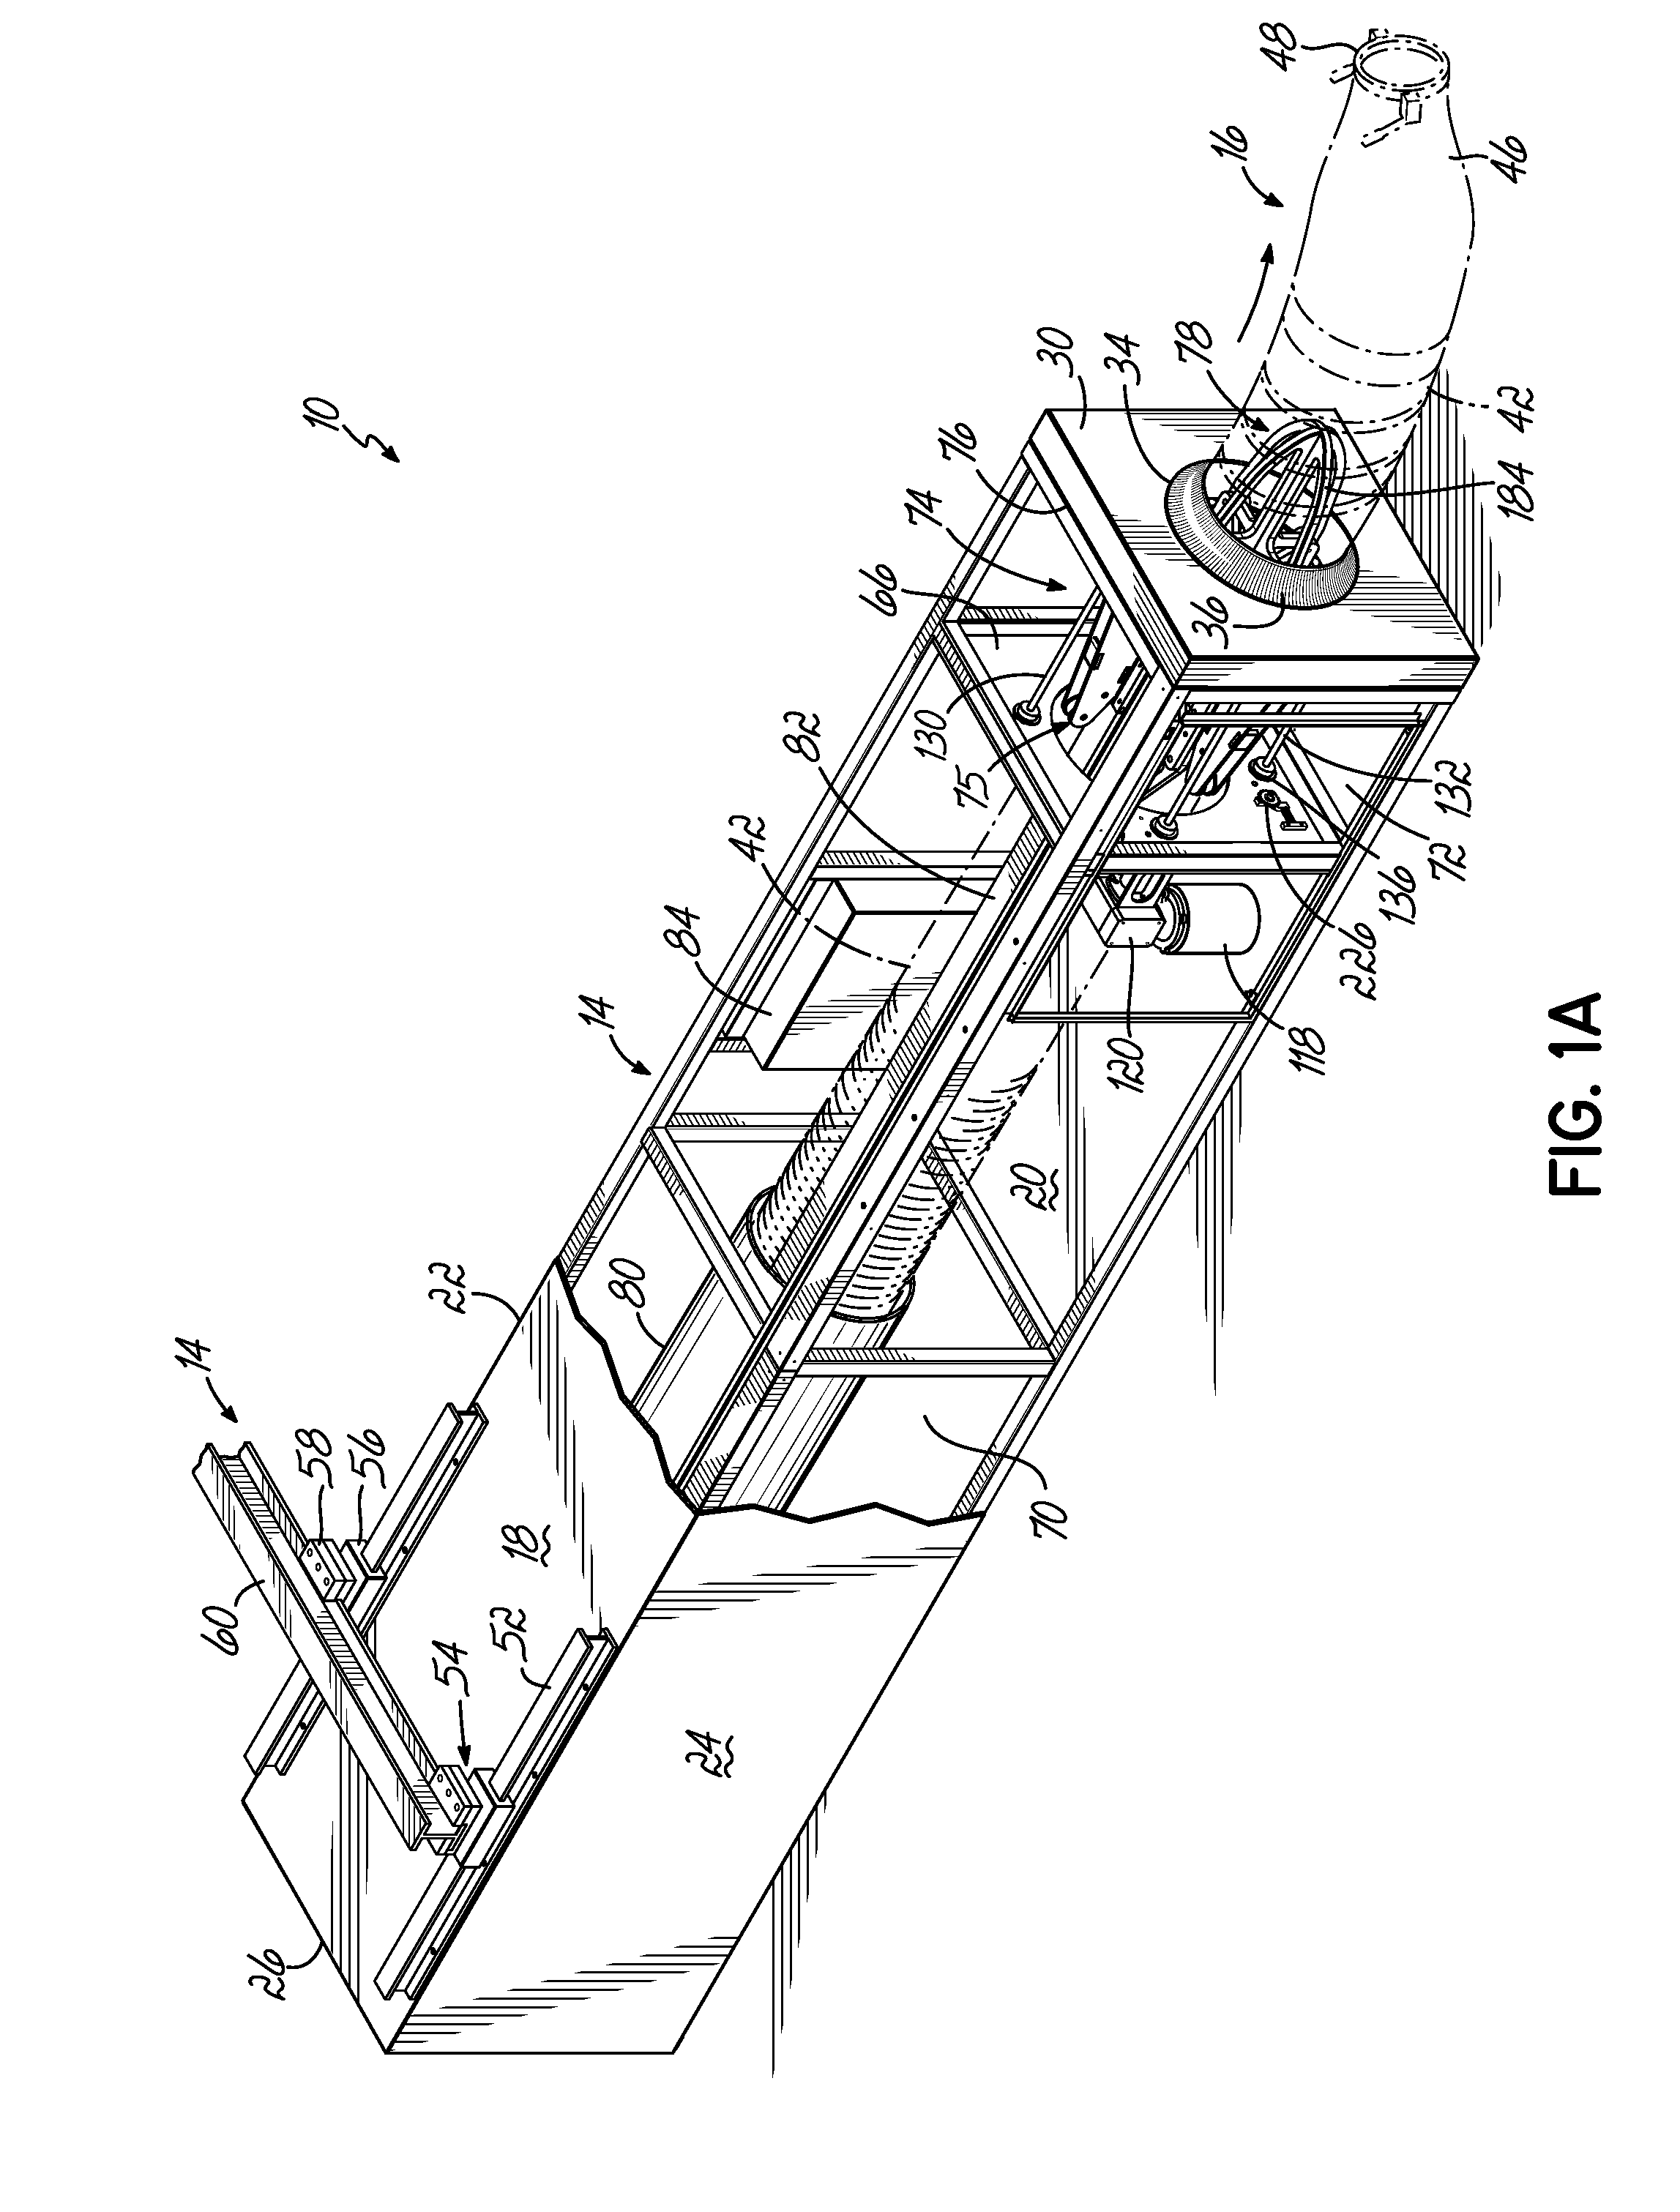 Hose Management System for Supplying Conditioned Air to an Aircraft